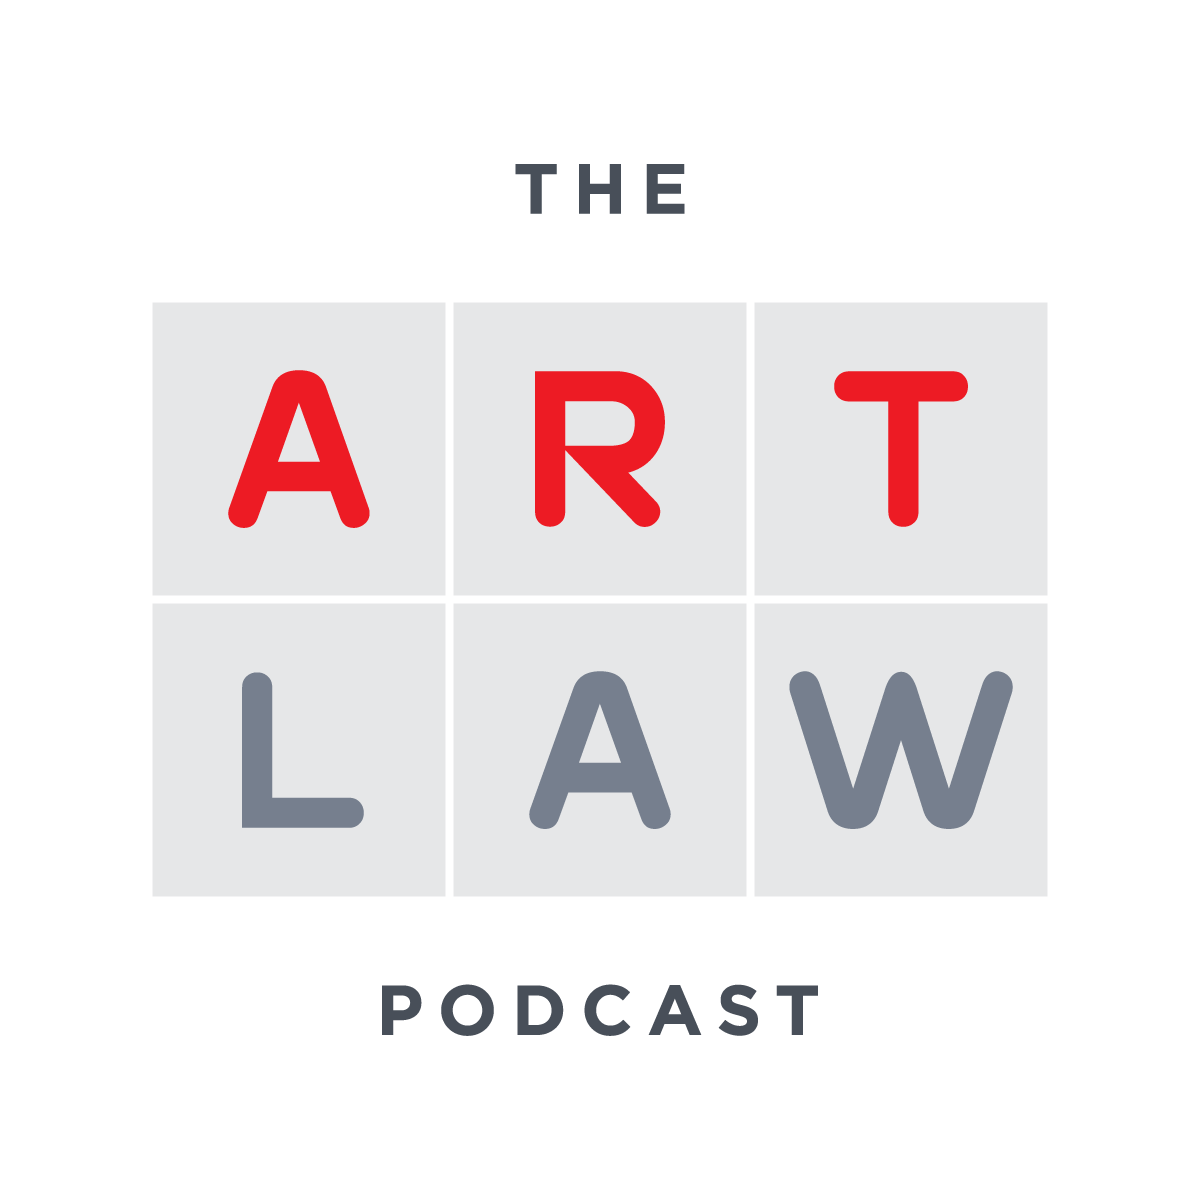 The Art Law Podcast